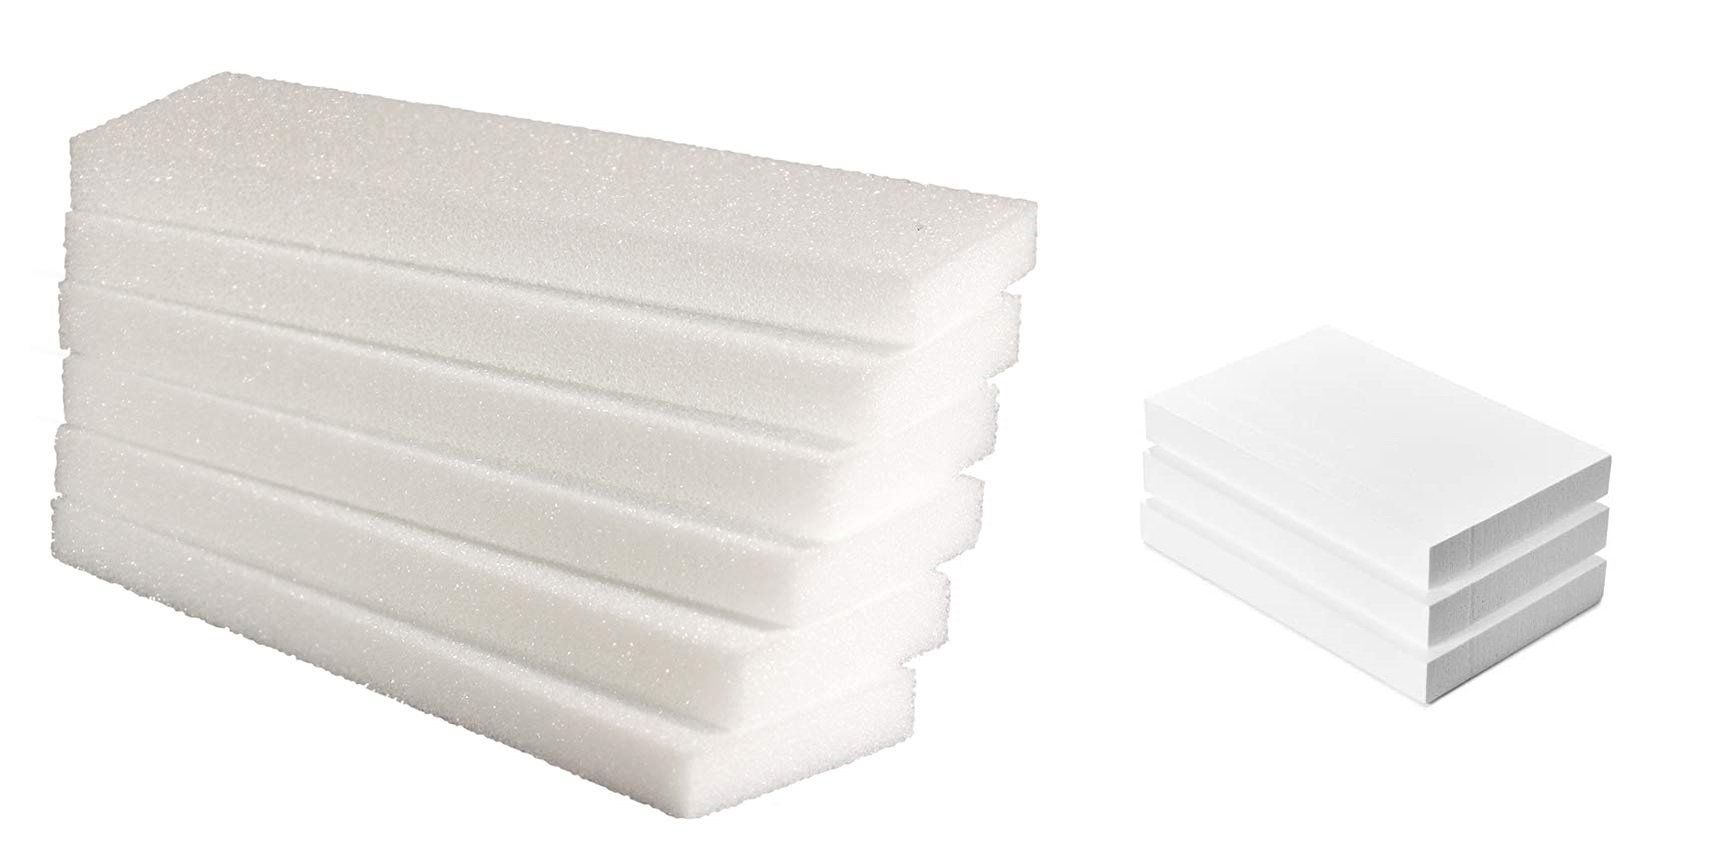 Styrofoam Sheets- Everything You Need To Know!